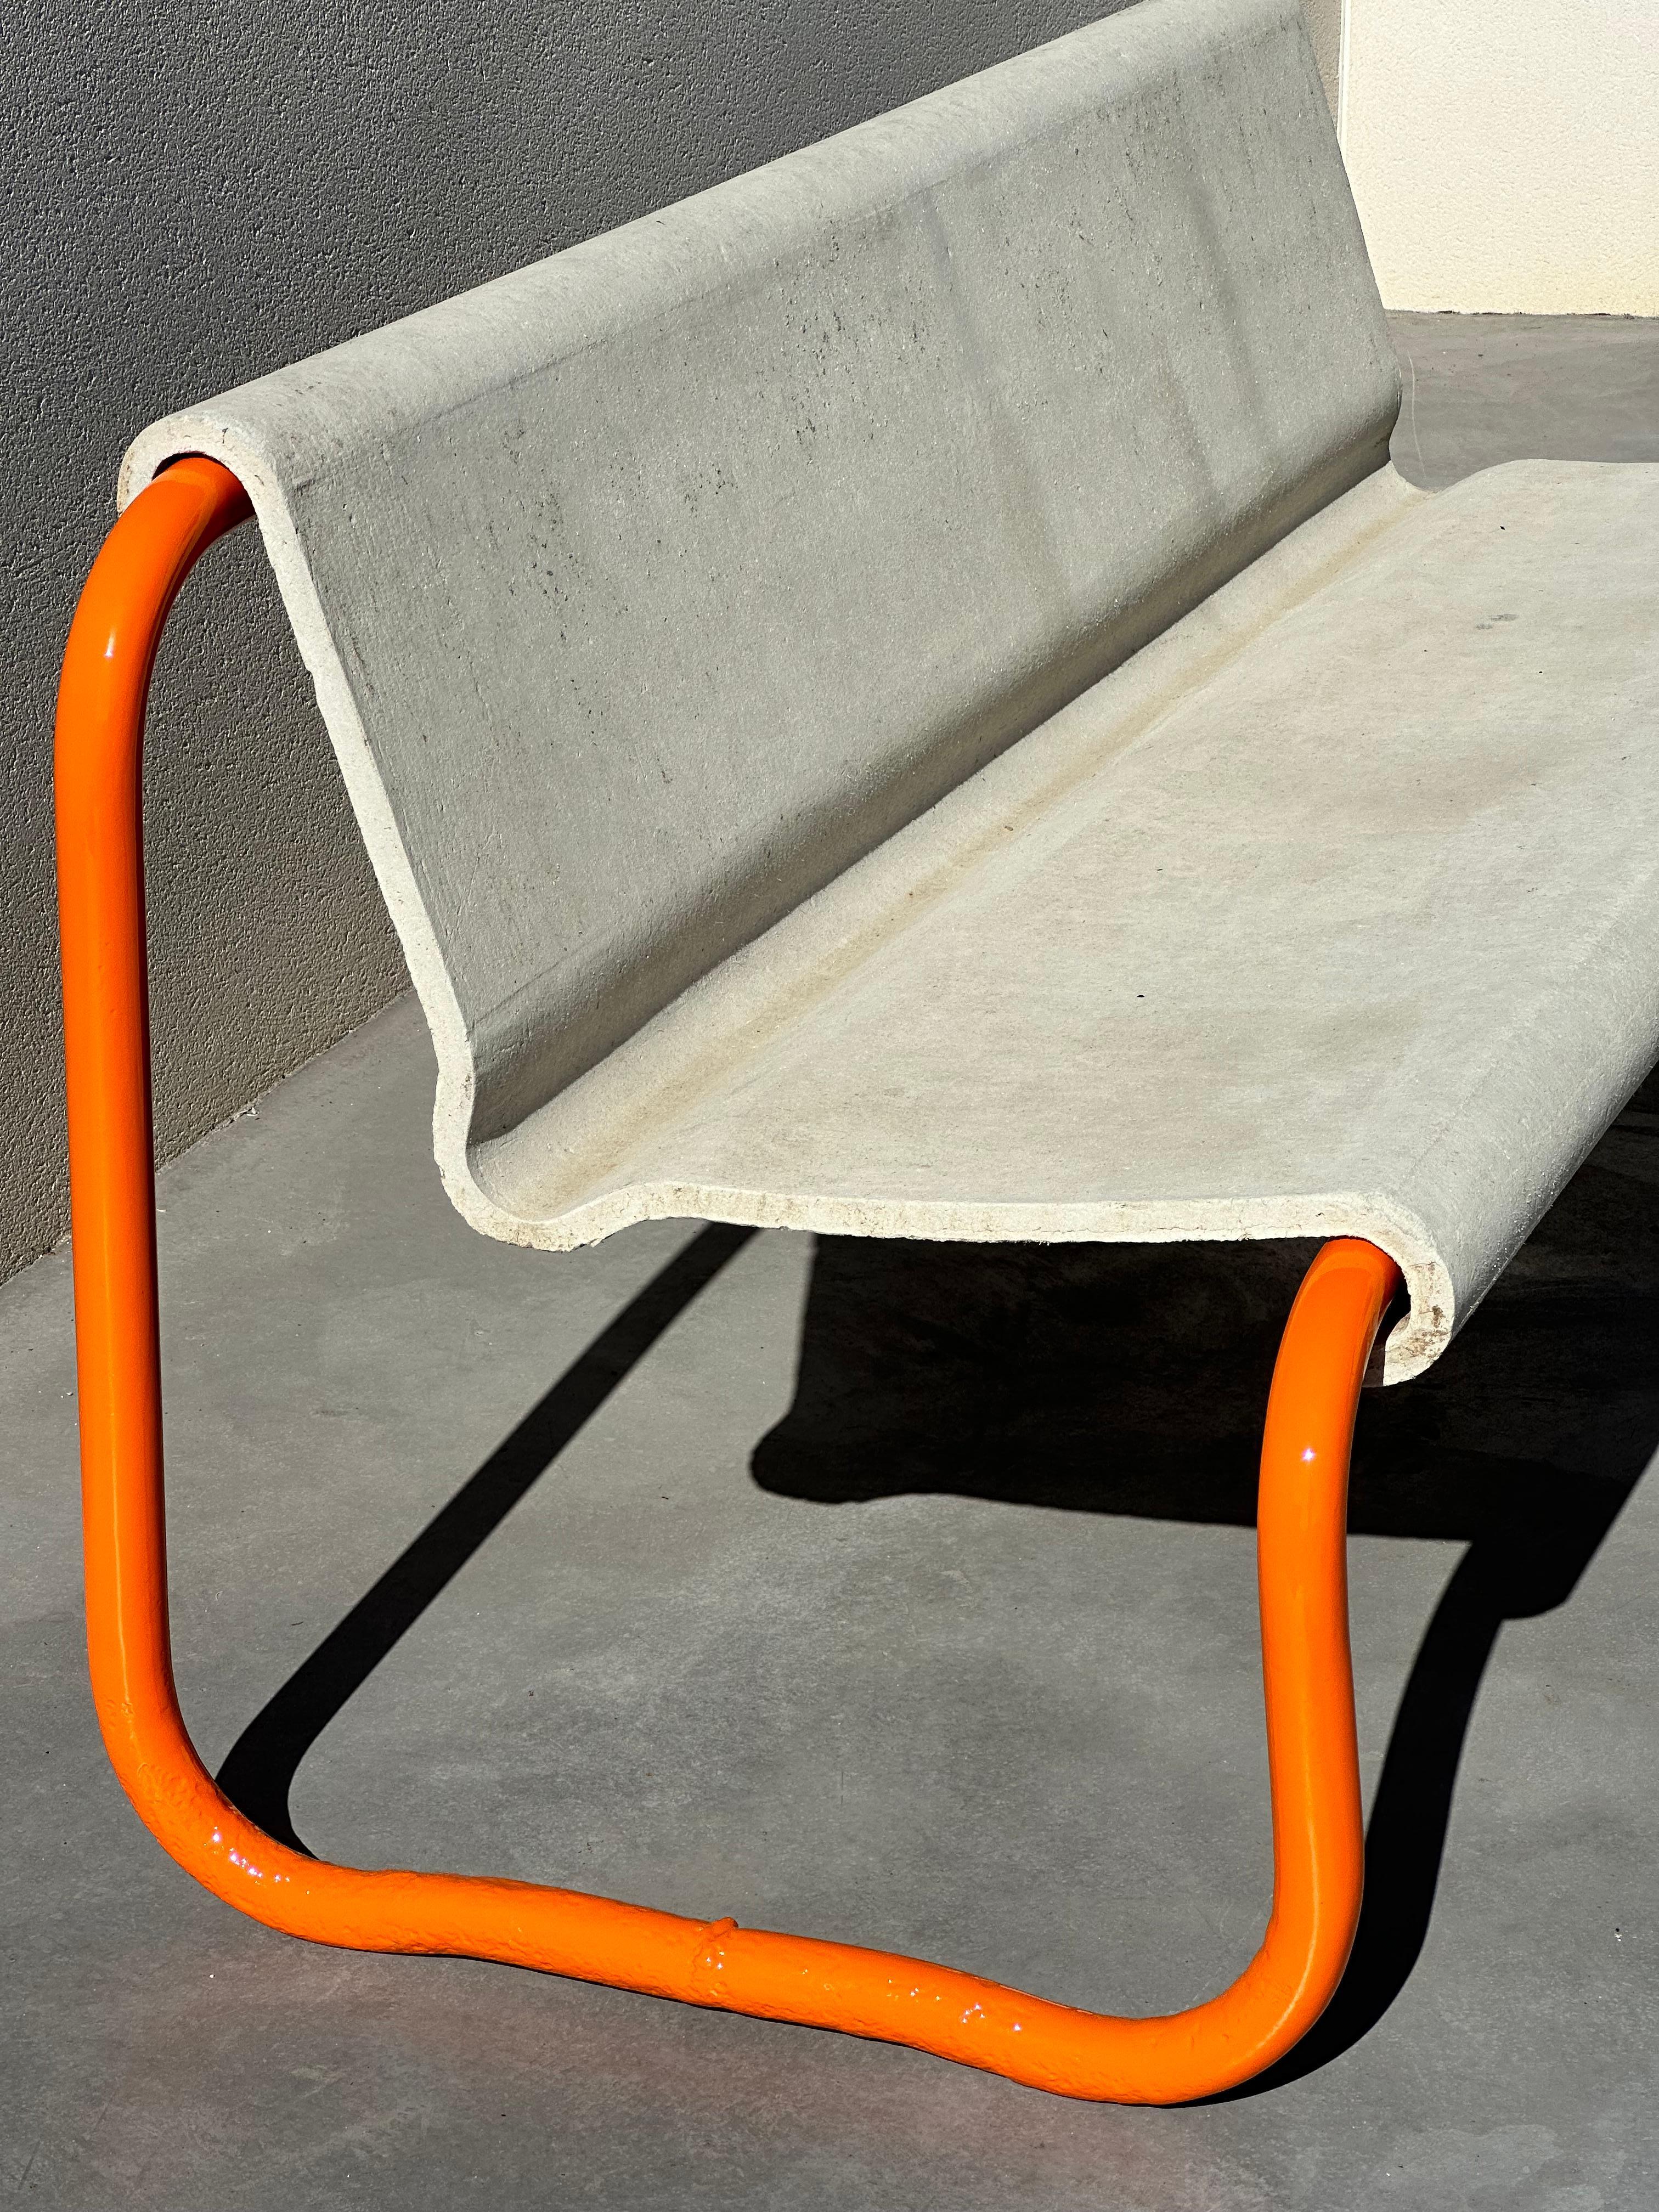 Willy Guhl Steel and Concrete Design Bench, Switzerland, 1950s For Sale 5